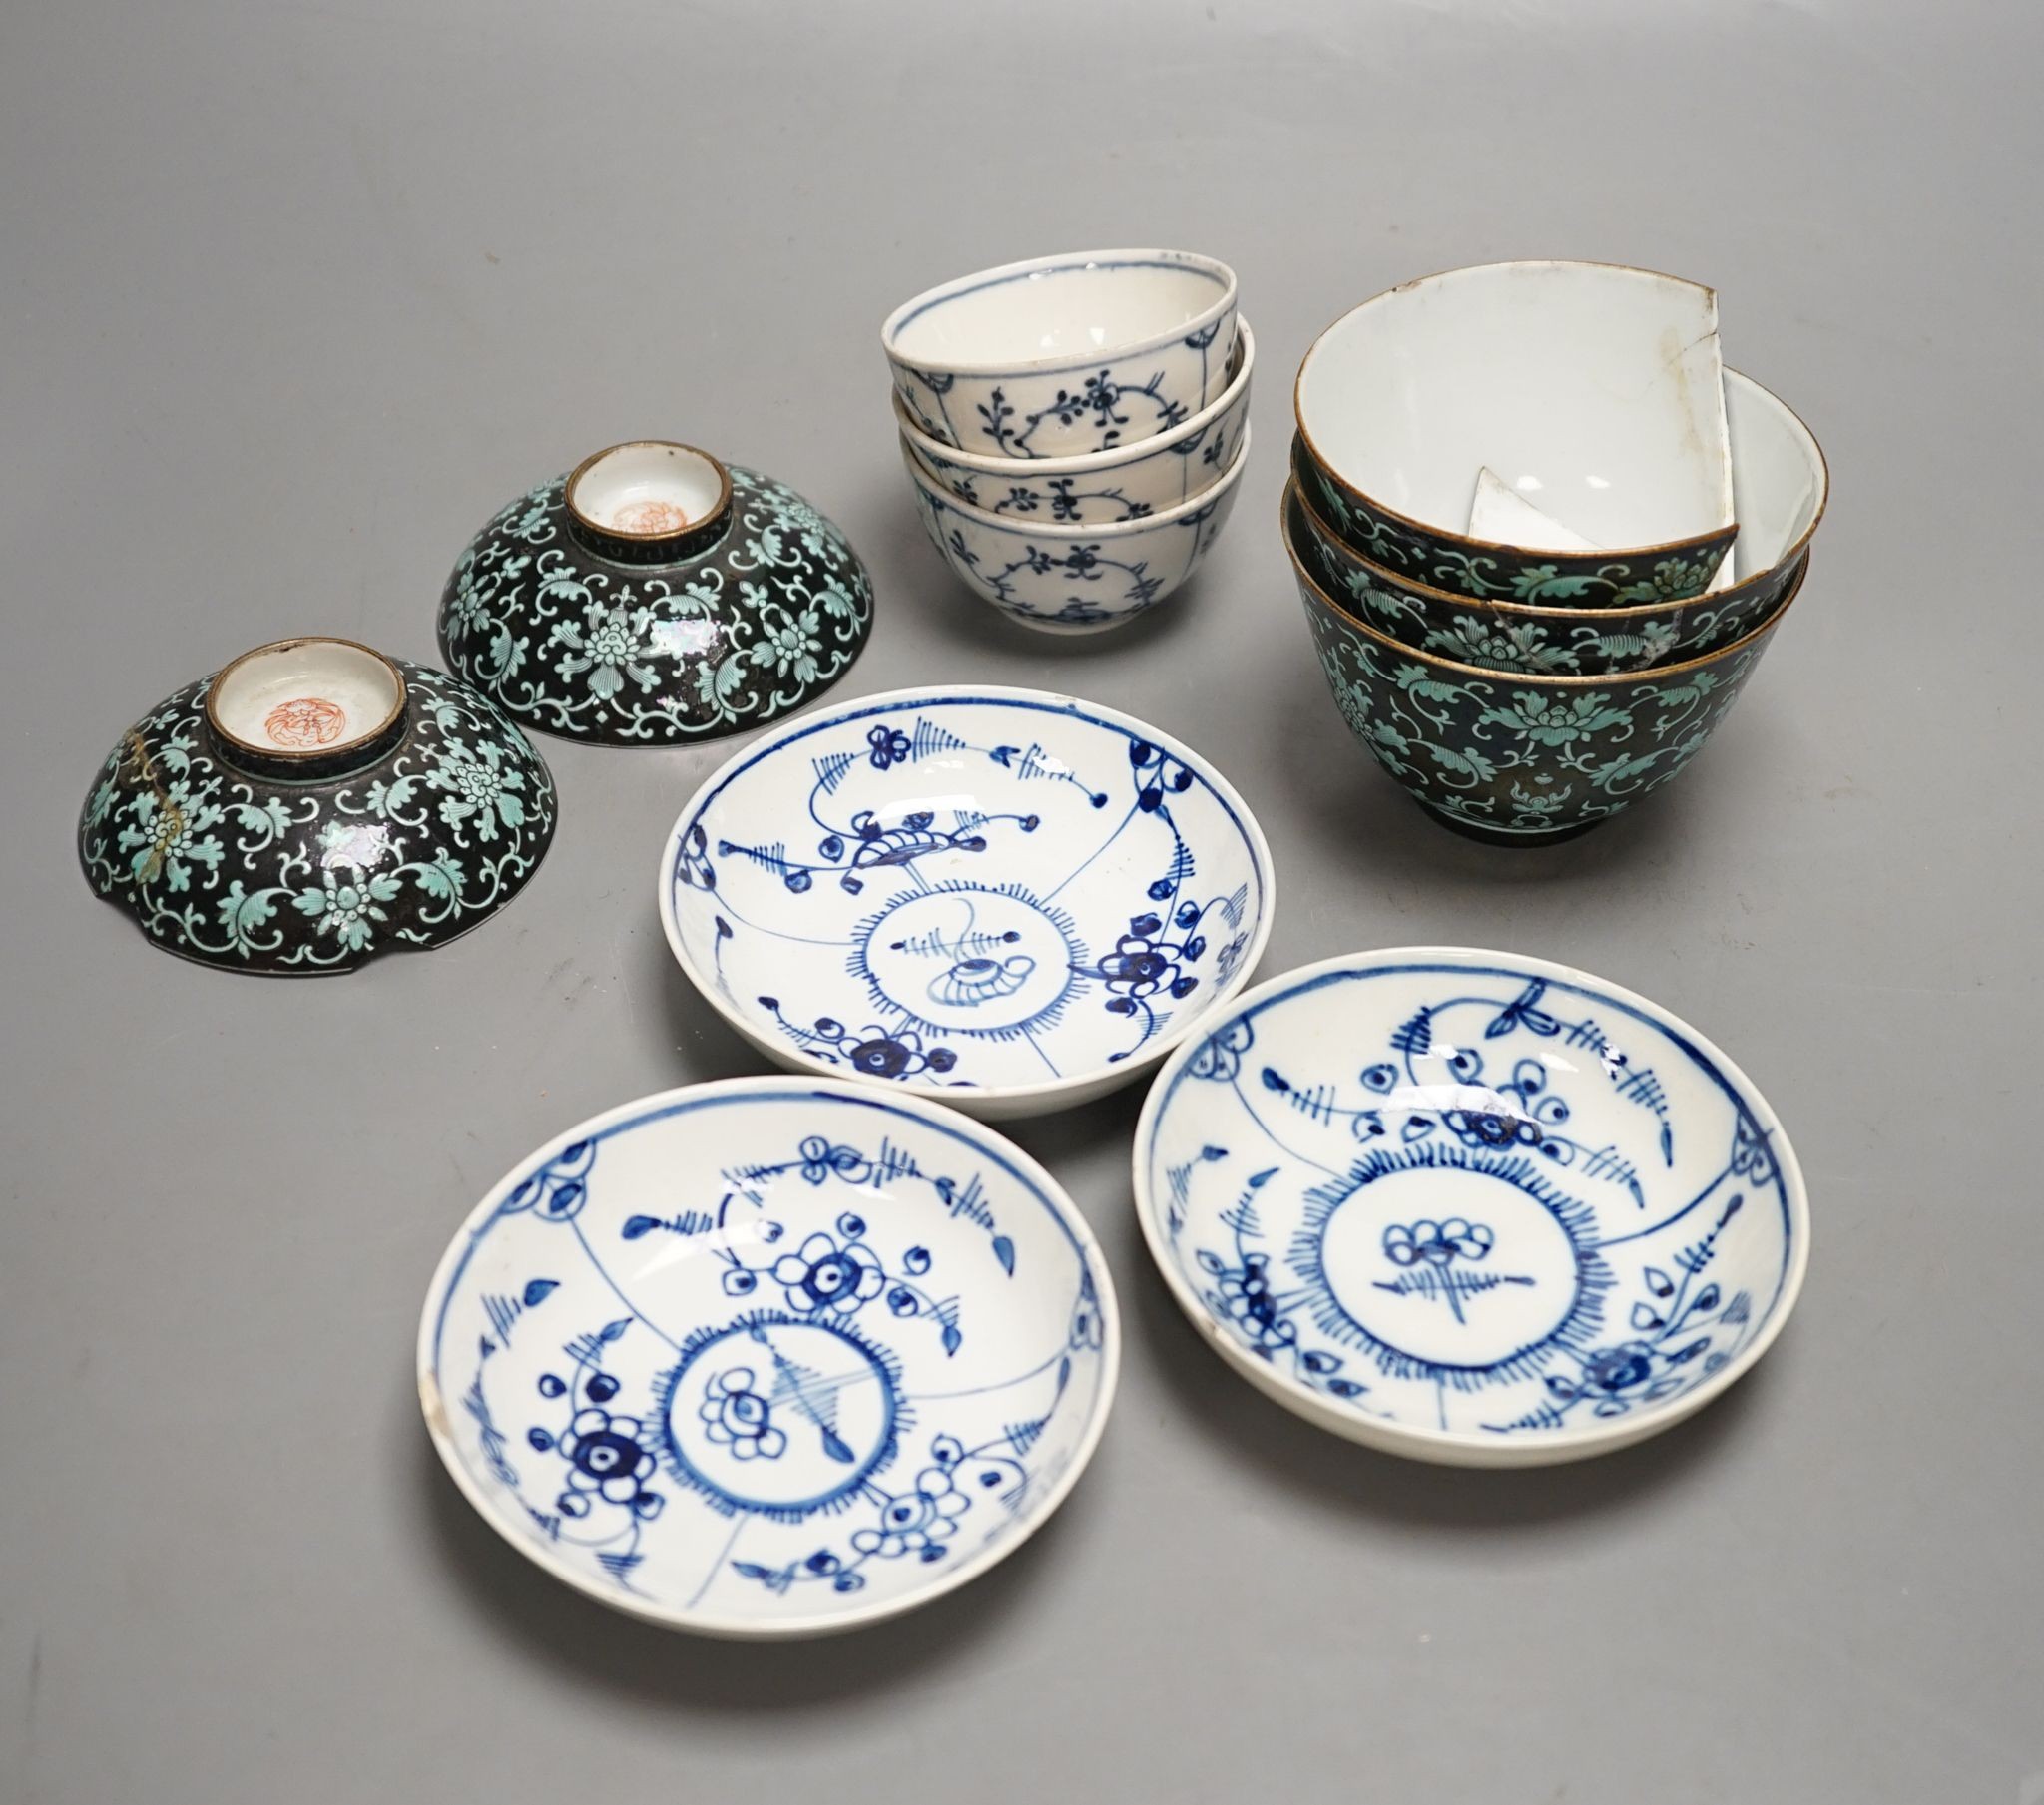 A 19th century Chinese black ground porcelain bowls and two covers, together with an three onion pattern blue and white tea bowls and saucers a/f